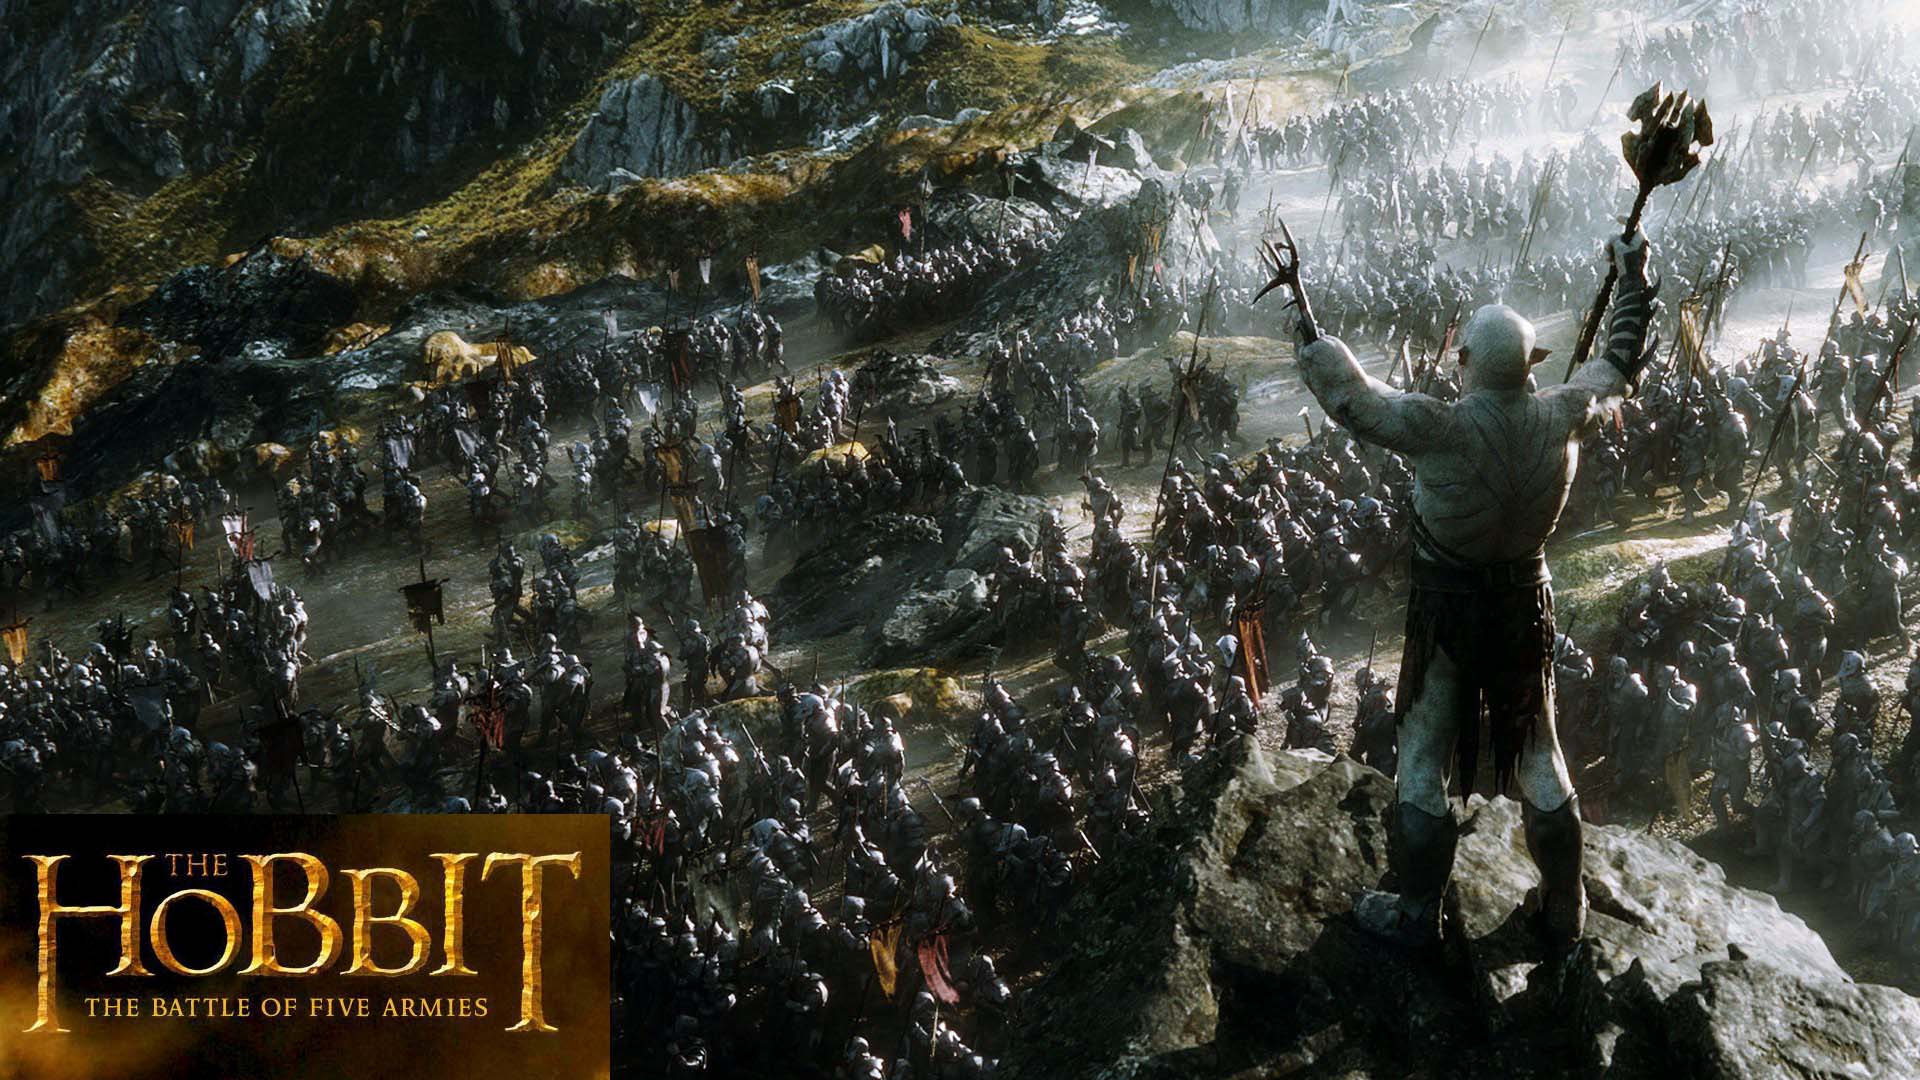 The-Hobbit-The-Battle-of-the-Five-Armies-HD-Movie-2014-5